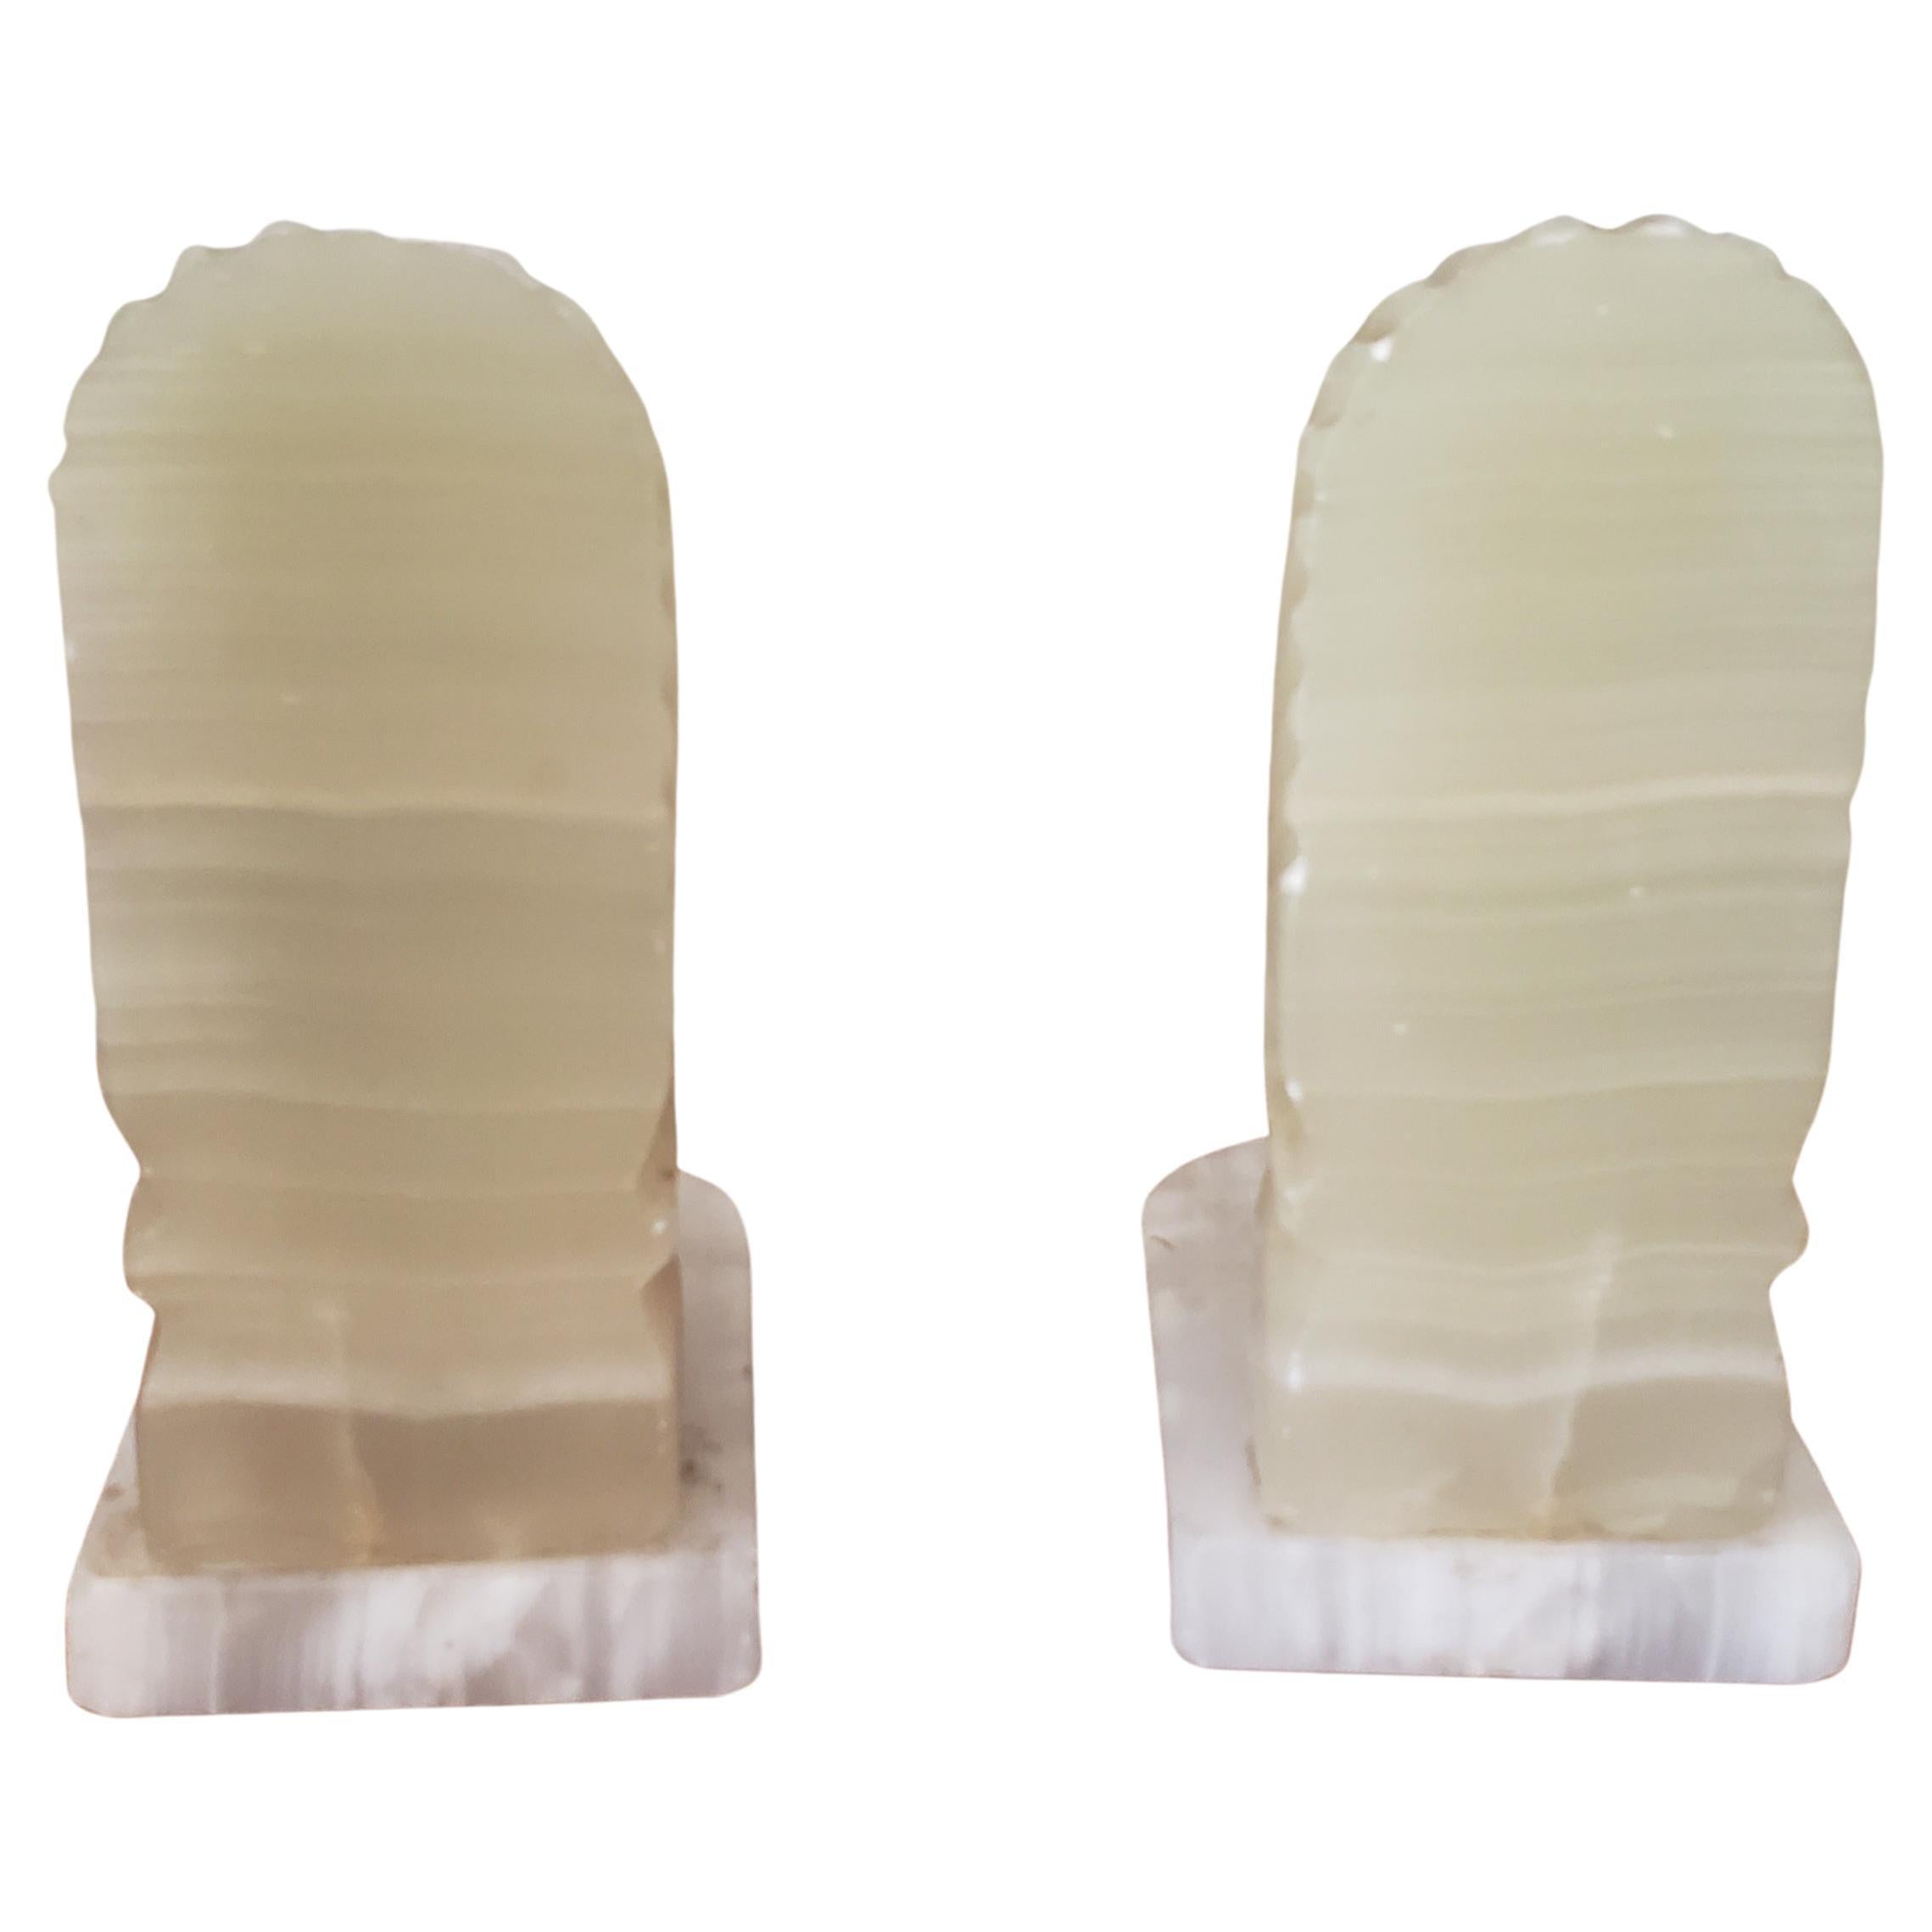 Fantastic pair of Onyx figural bookends. Measure 5